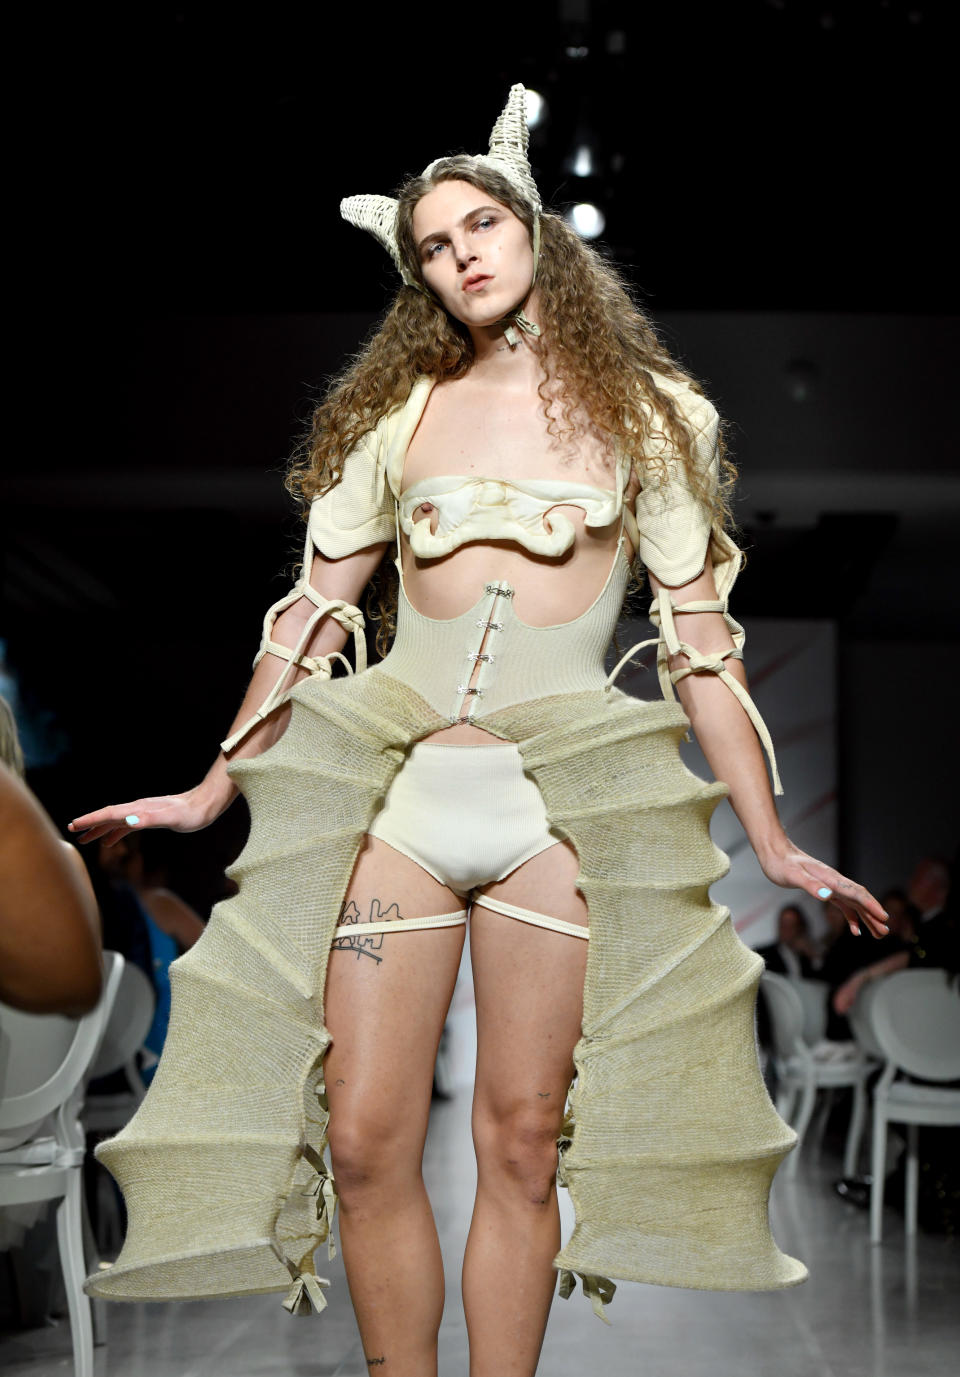 A runway look from the Parsons fashion show. - Credit: Courtesy of Parsons